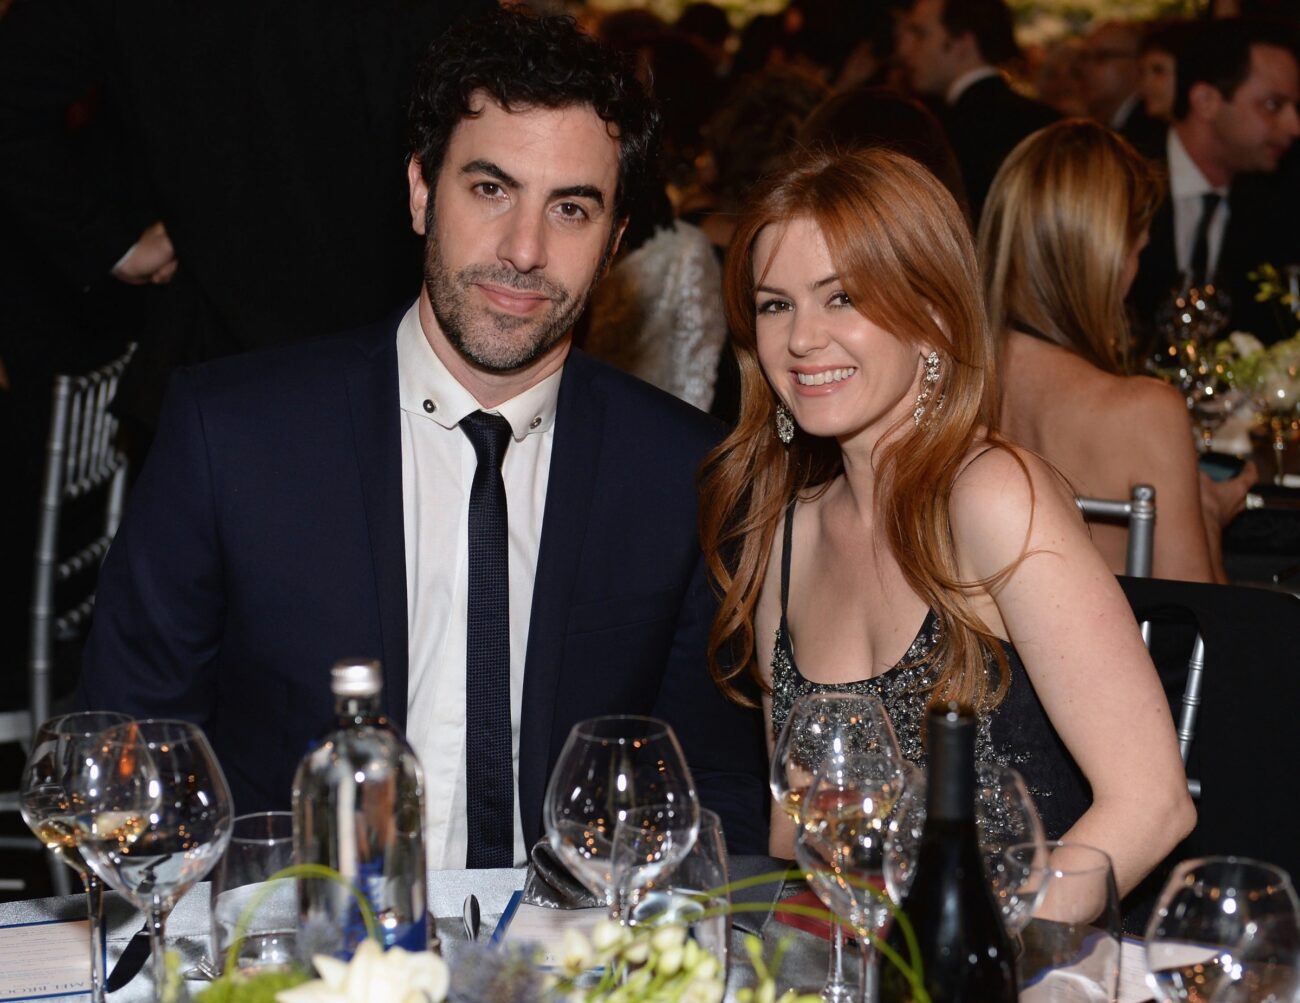 Sacha Baron Cohen and his wife Isla Fisher are known as one of Hollywood’s funniest couples. So, why did they have to flee Sydney?